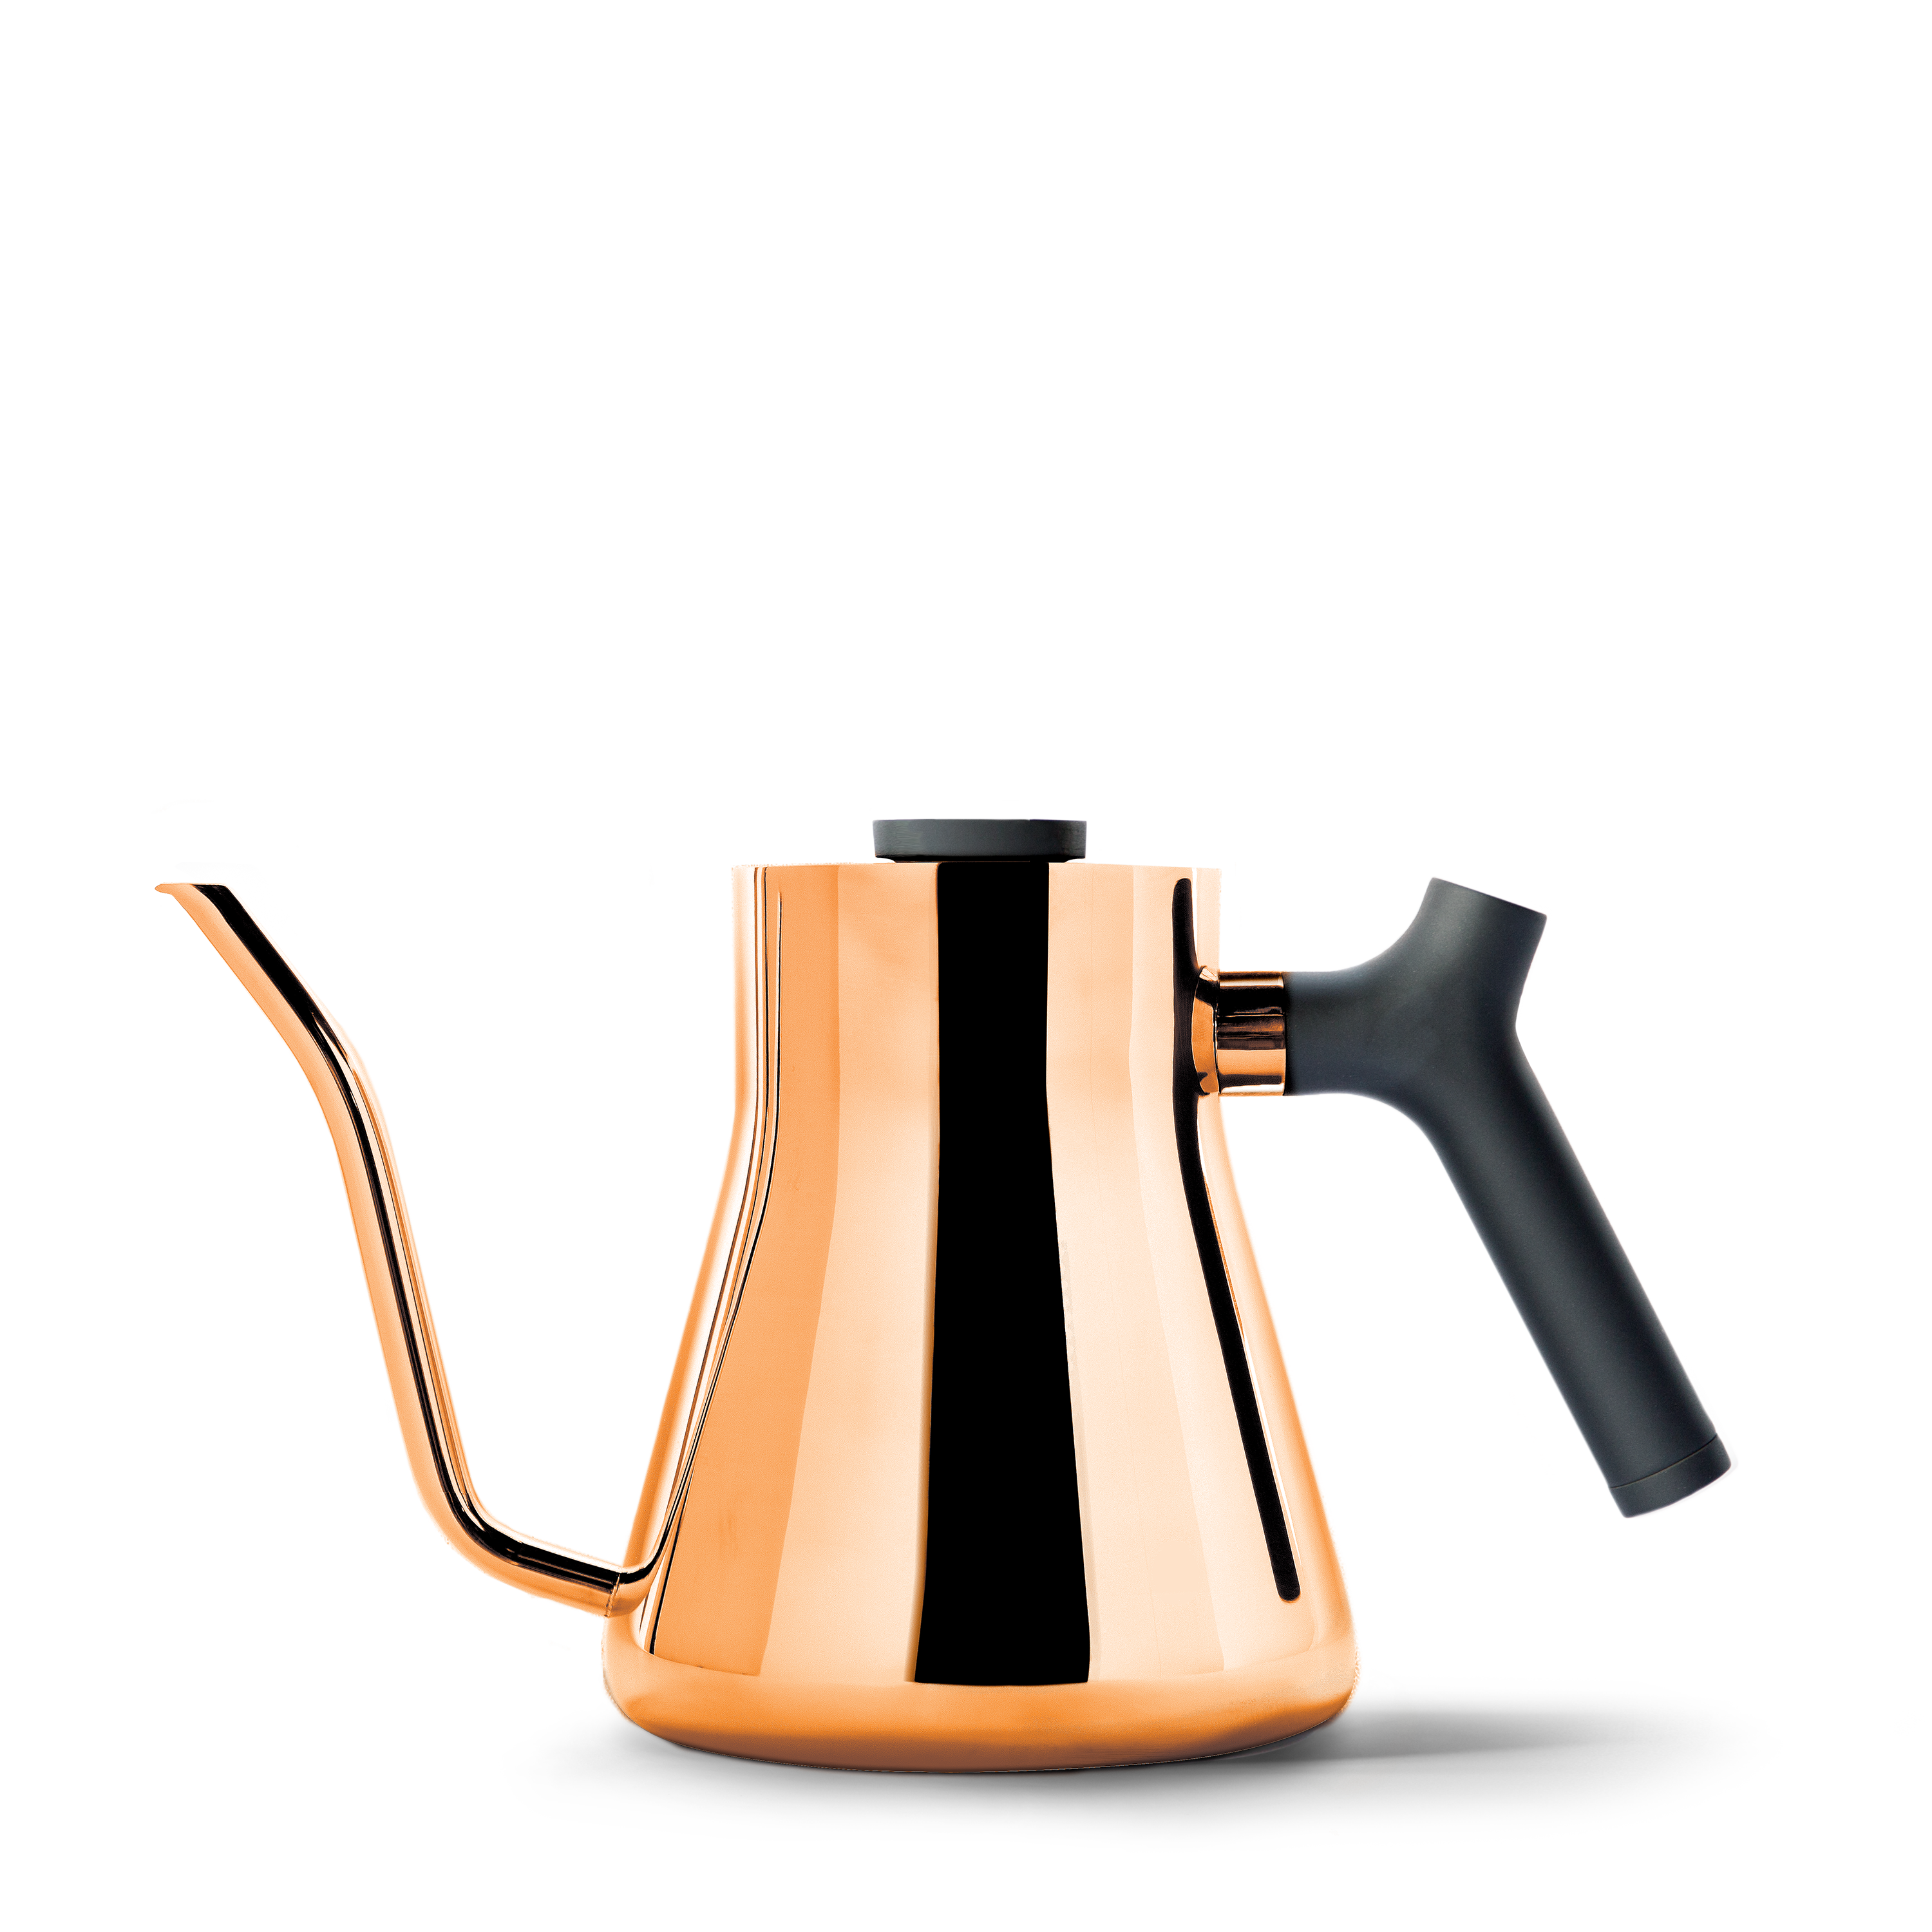 Fellow Stagg EKG Copper Electric Pour-Over Kettle